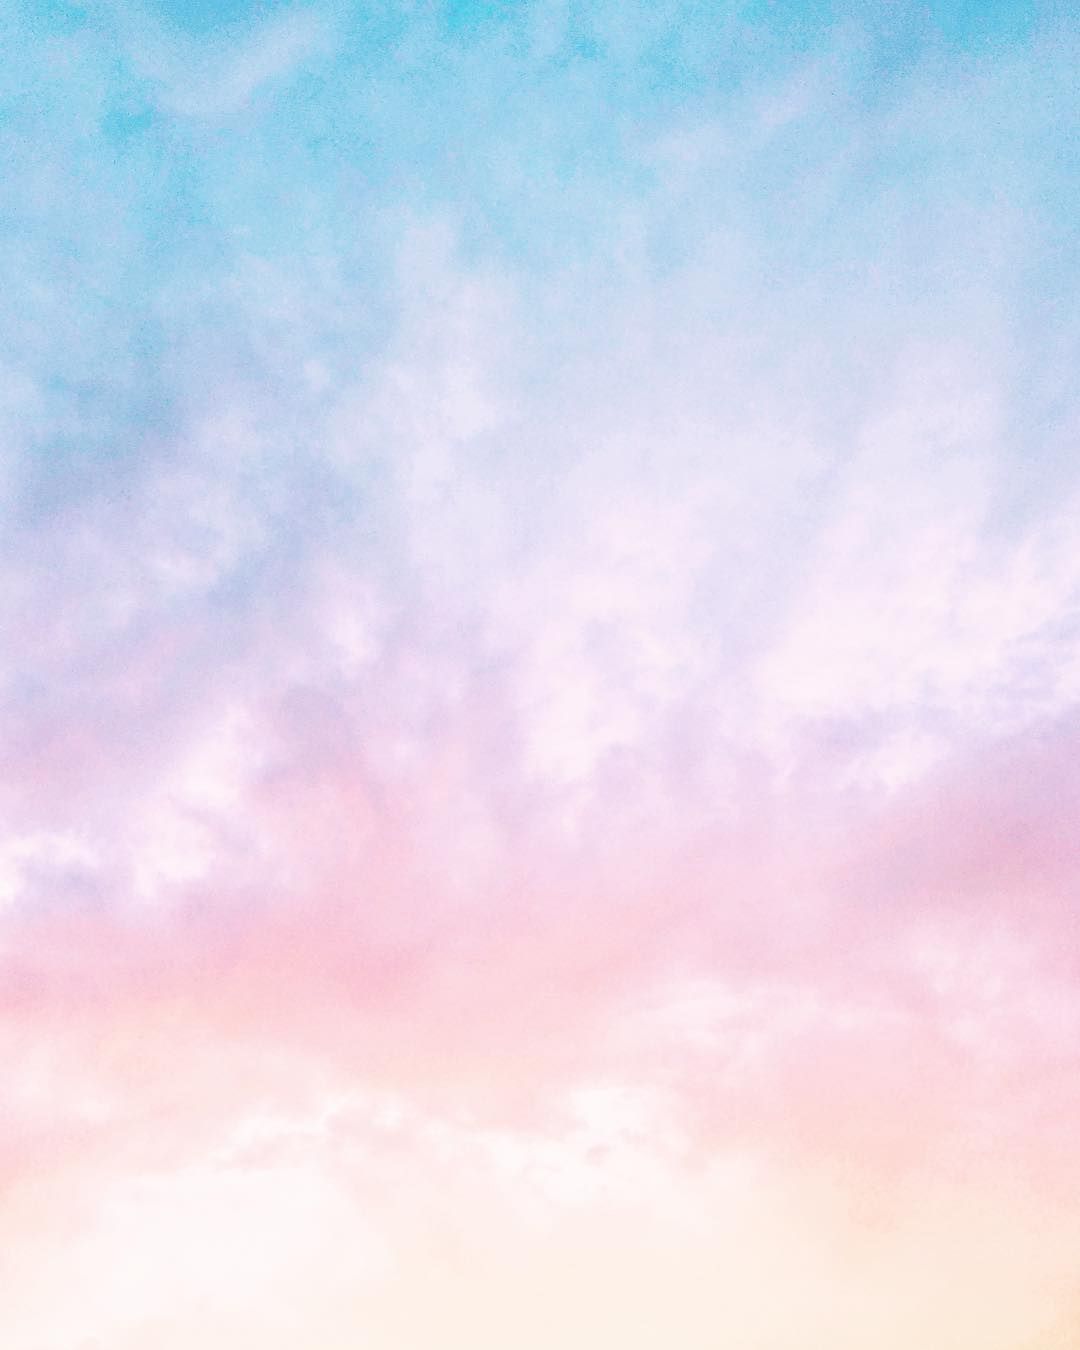 Cotton Candy Clouds Pastel Sky Photo by Mint and Merit. Pastel sky, Cotton candy sky, Pastel clouds